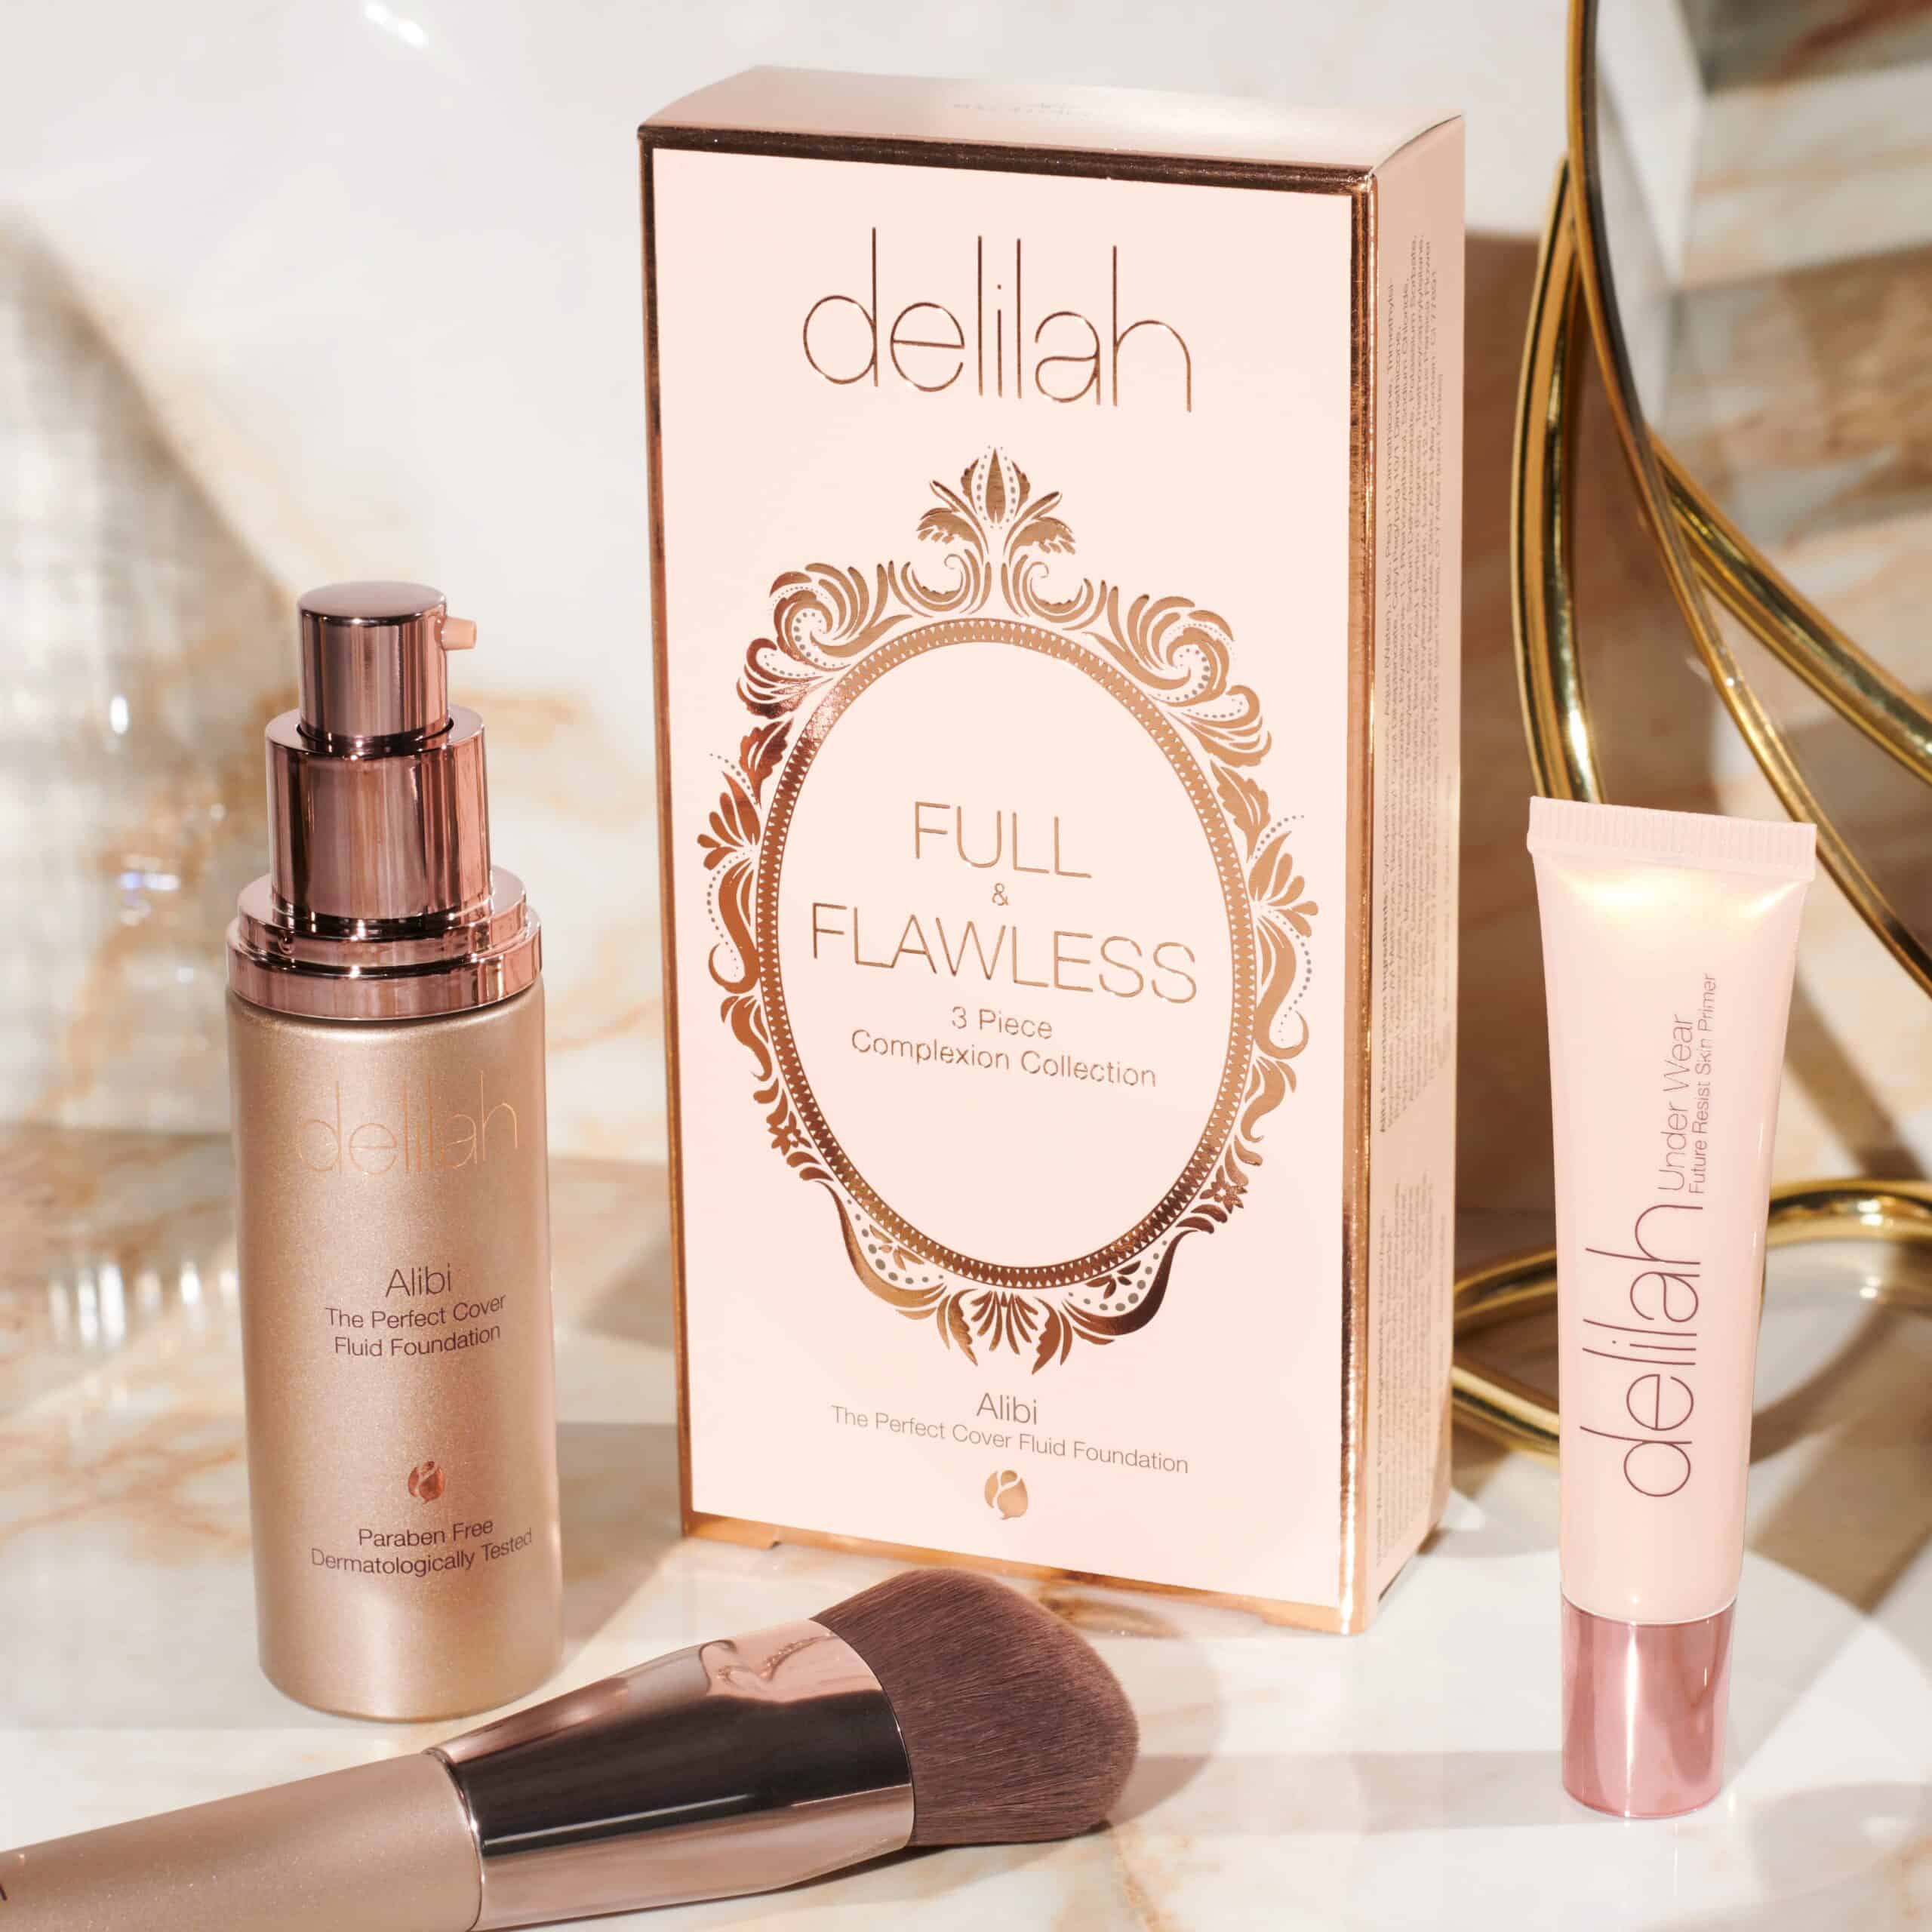 Delilah's full & flawless product collection